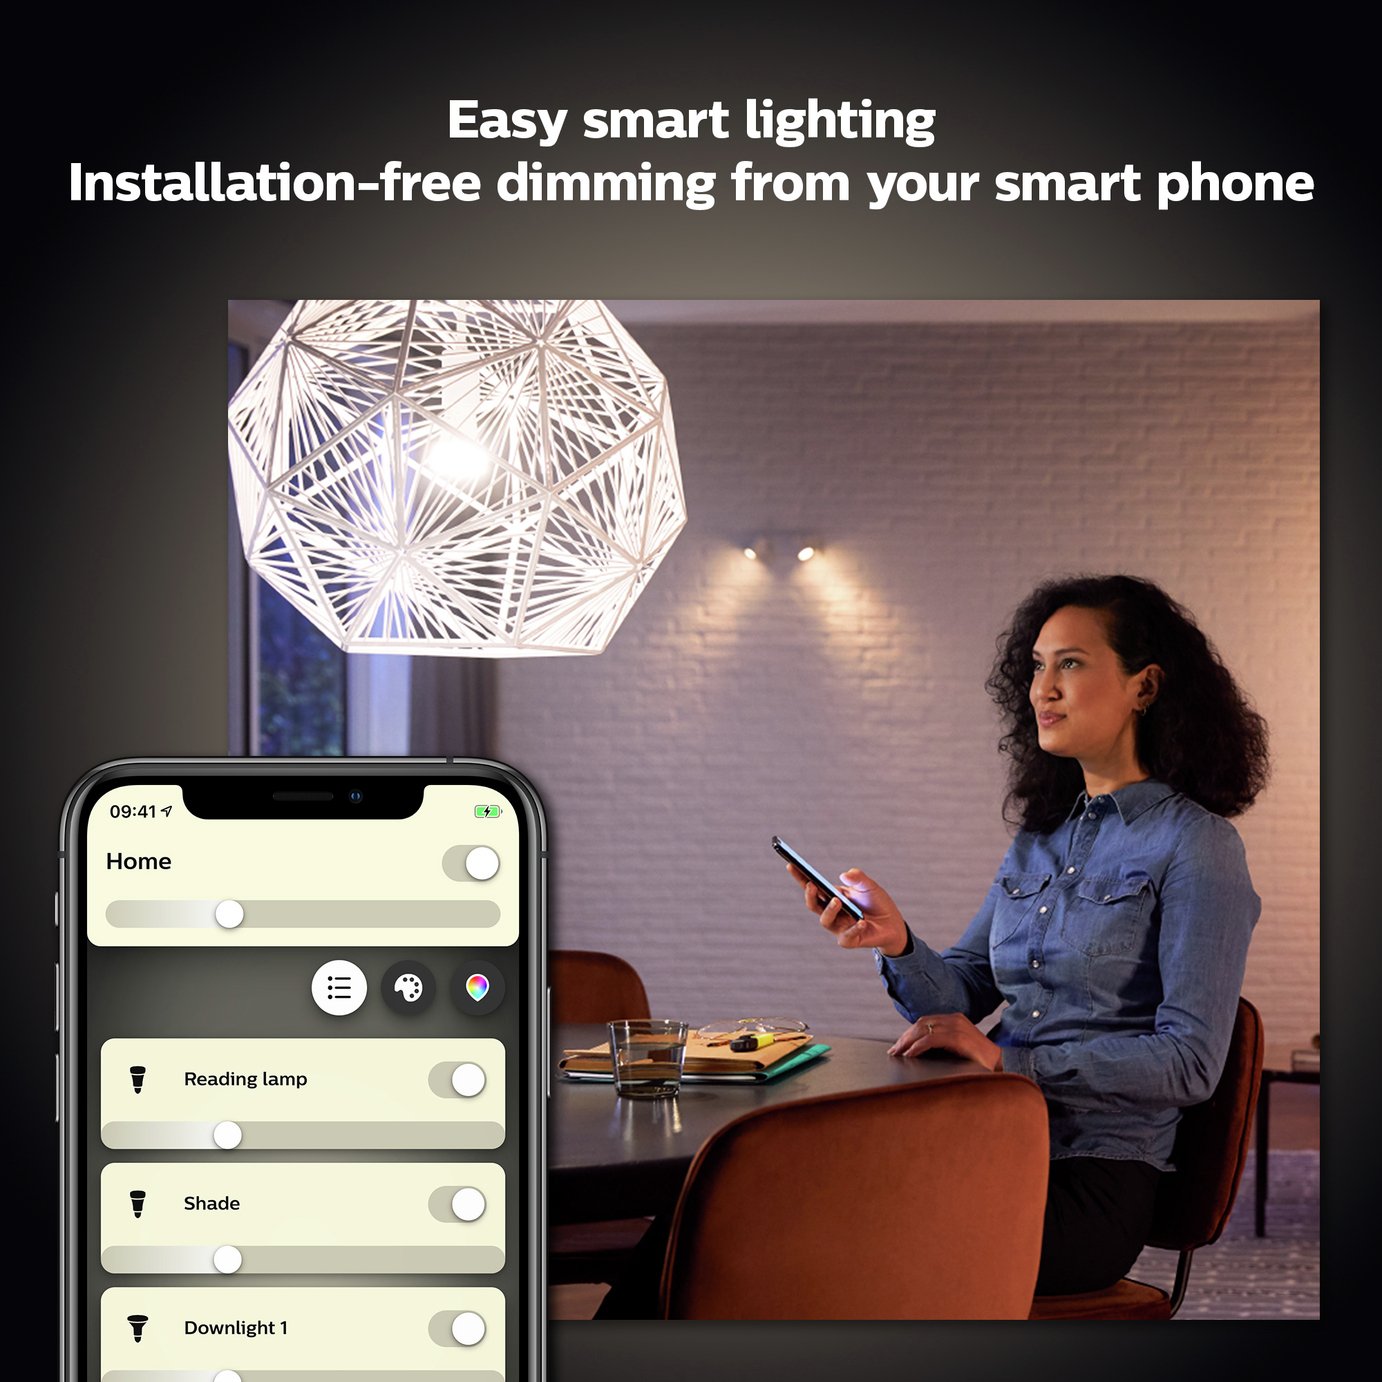 Philips Hue E27 White Smart Bulb with Bluetooth Review